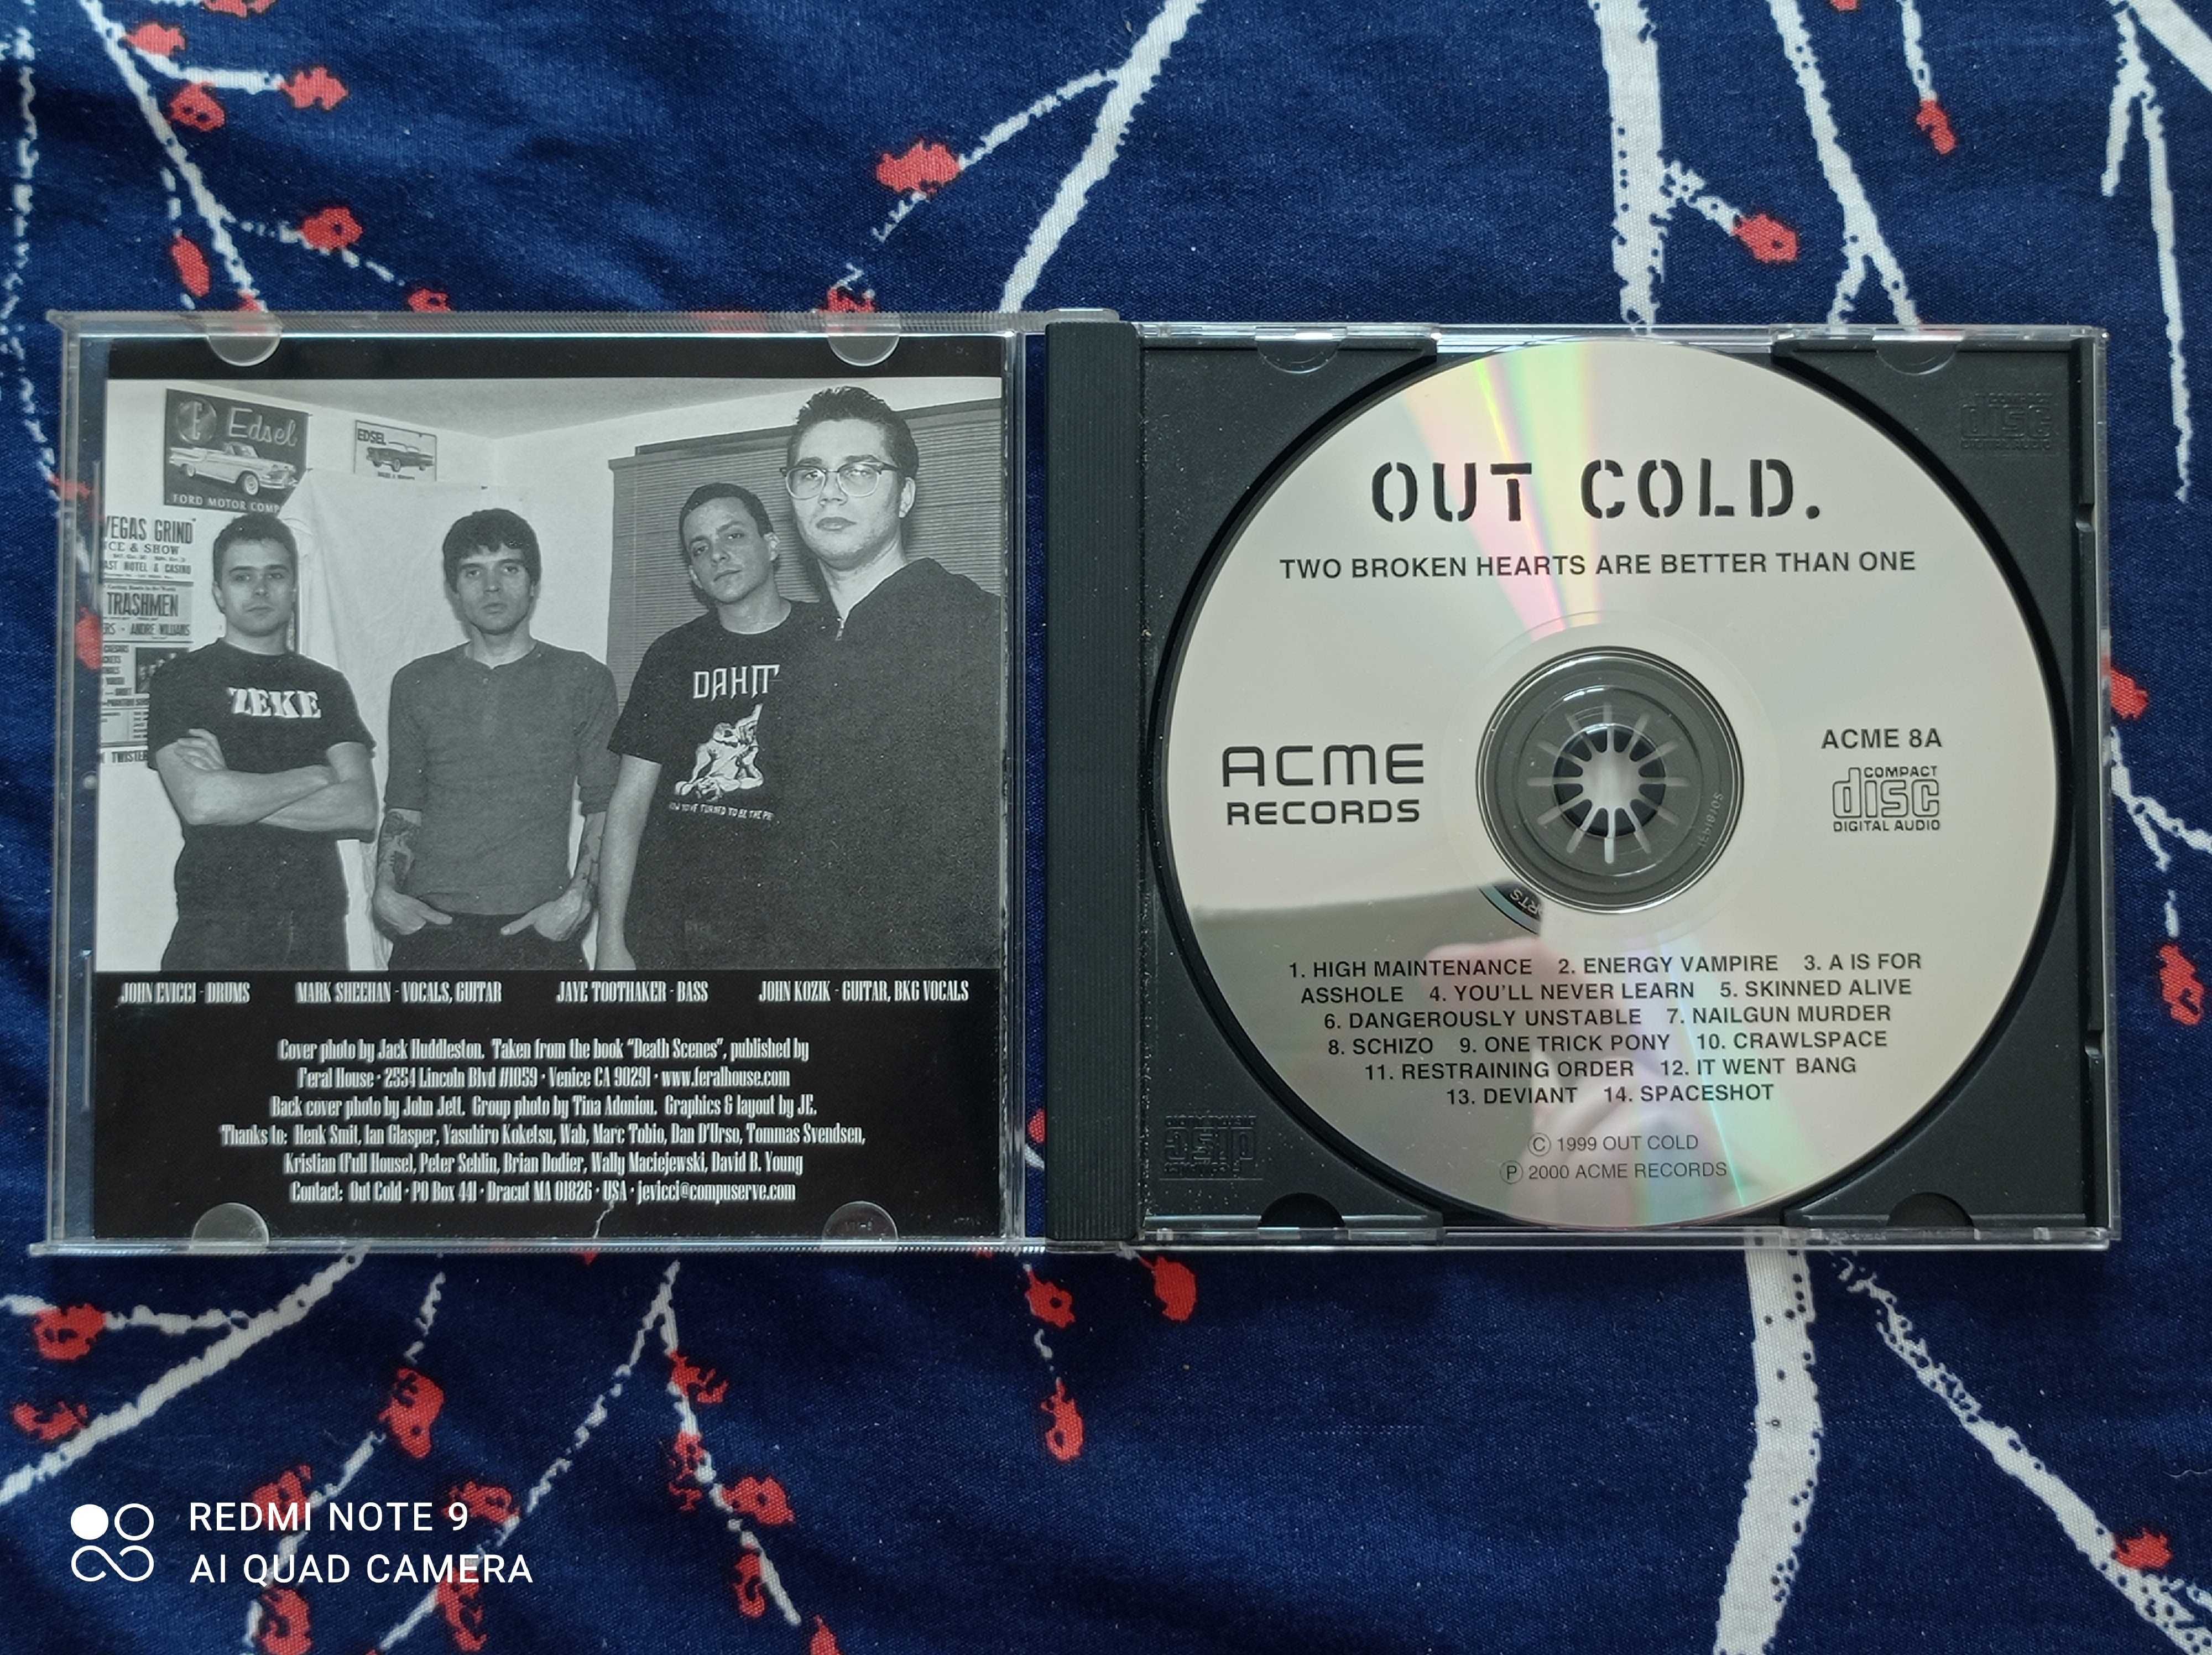 Out Cold - Two Broken Hearts Are Better Than One CD US hardcore punk